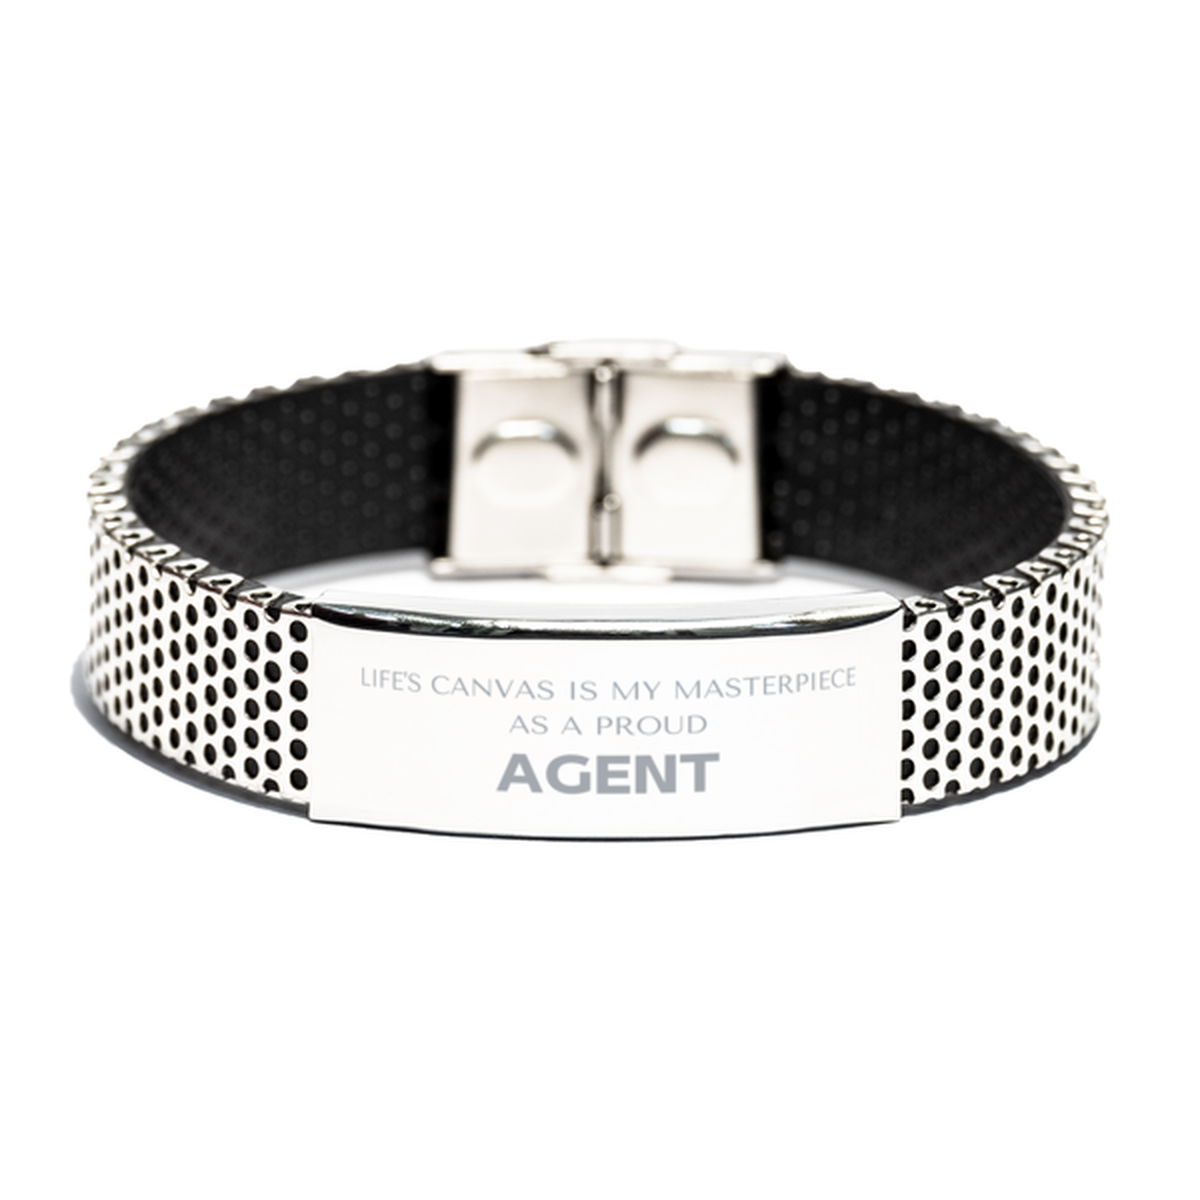 Proud Agent Gifts, Life's canvas is my masterpiece, Epic Birthday Christmas Unique Stainless Steel Bracelet For Agent, Coworkers, Men, Women, Friends